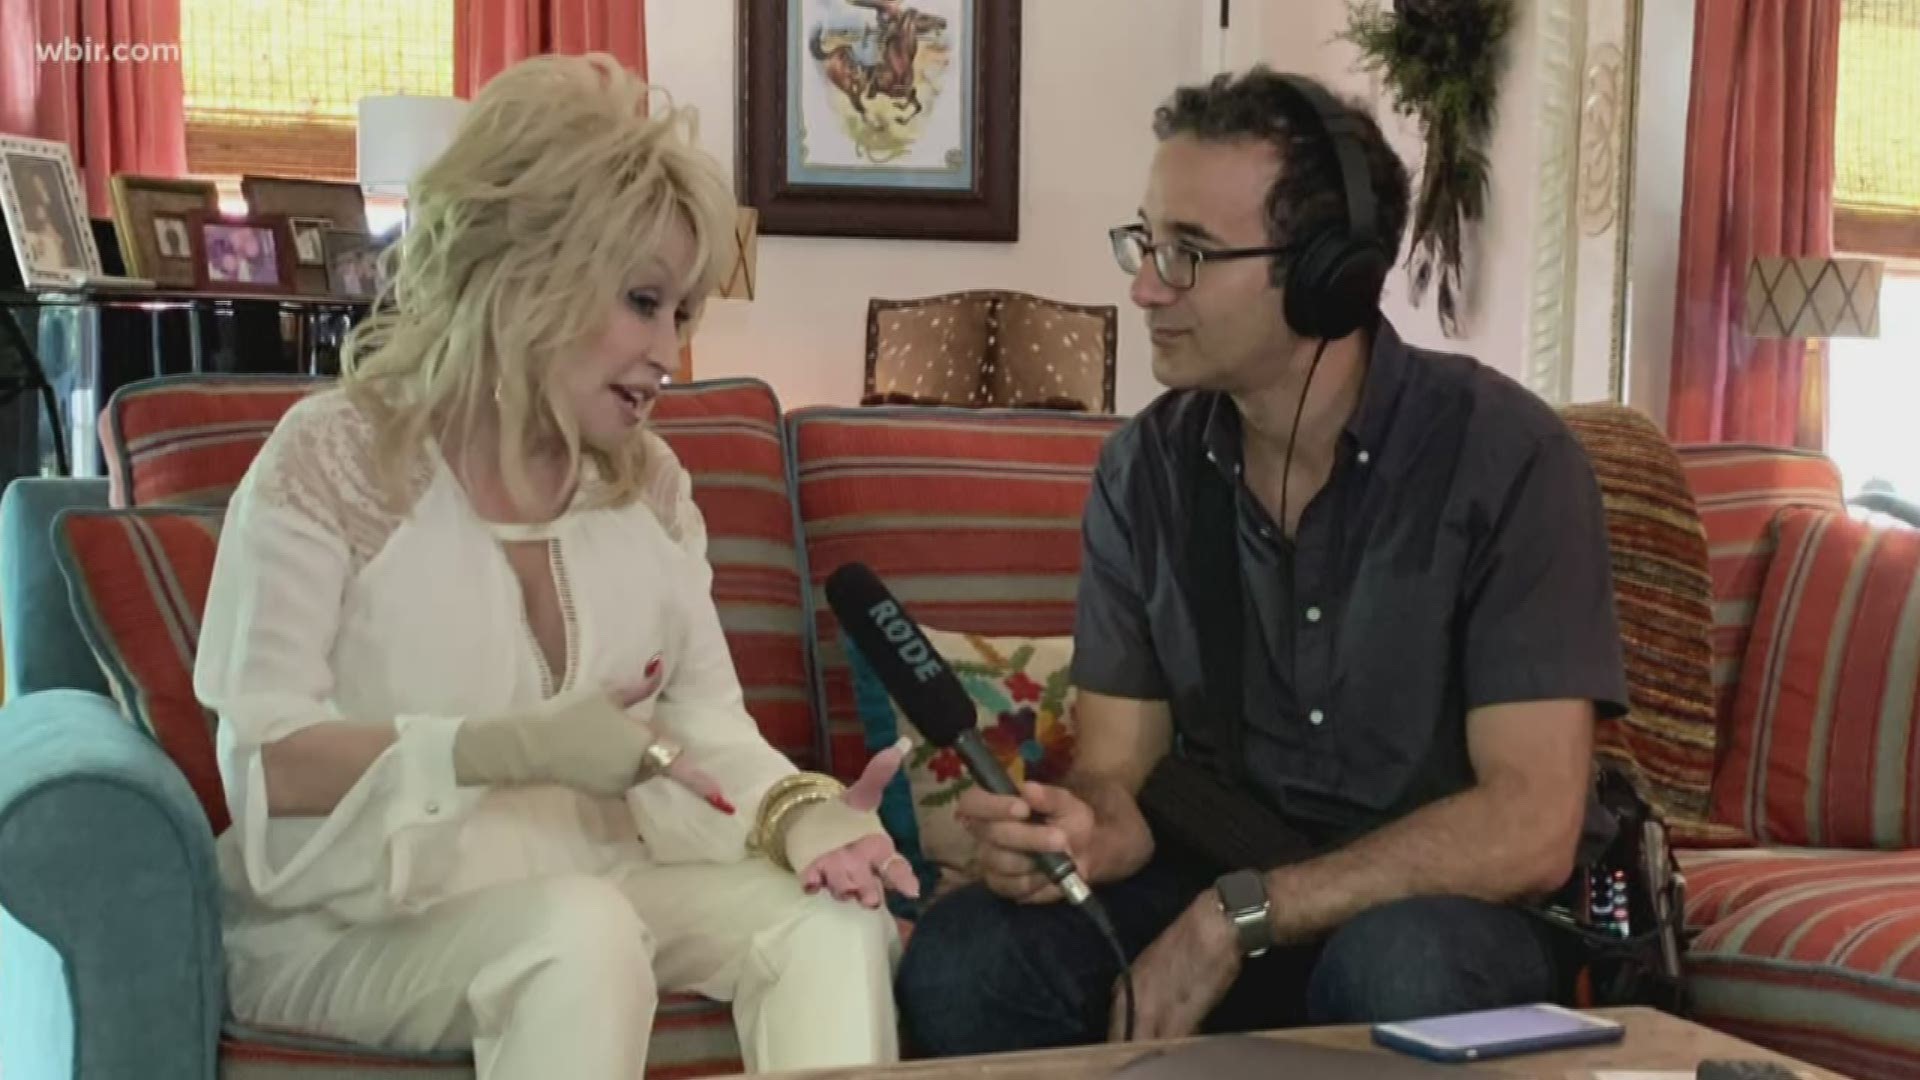 Episode 7 of Dolly Parton's America deals with UT Class that inspired podcast's name, wnycstudios.org/podcasts/dolly-partons-america. Dec. 4, 2019-4pm.